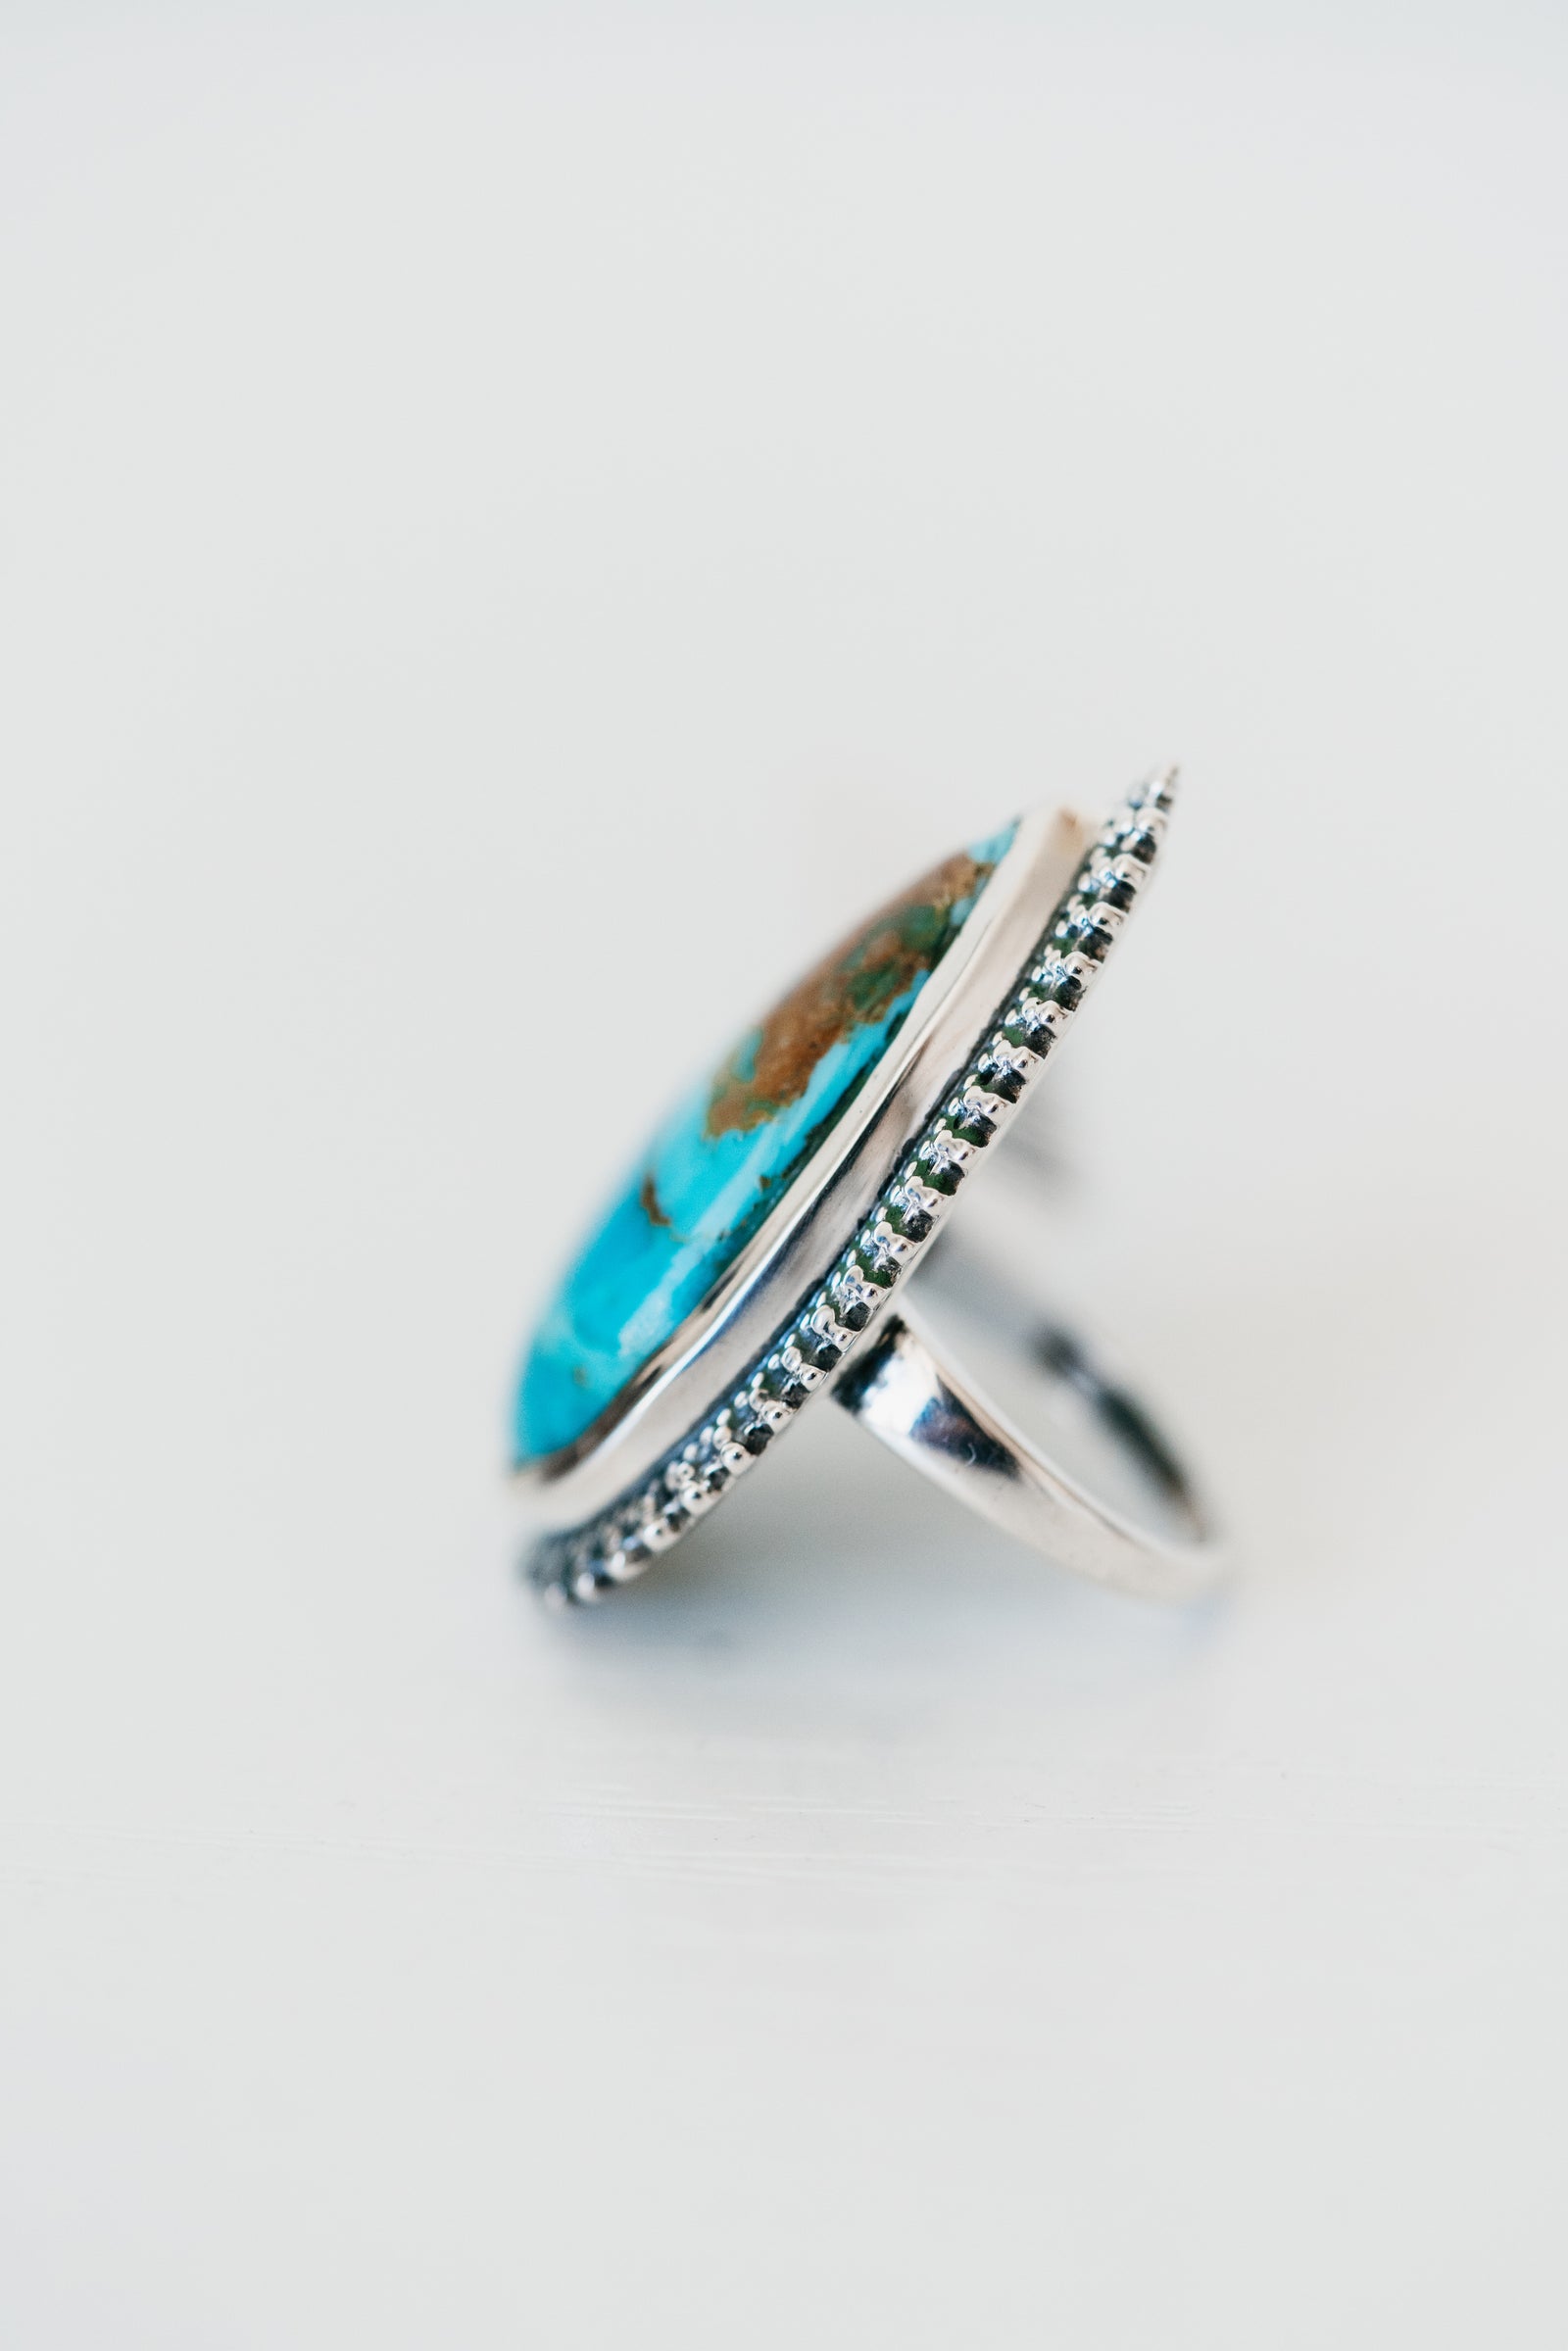 Pierre Ring | Boulder Turquoise